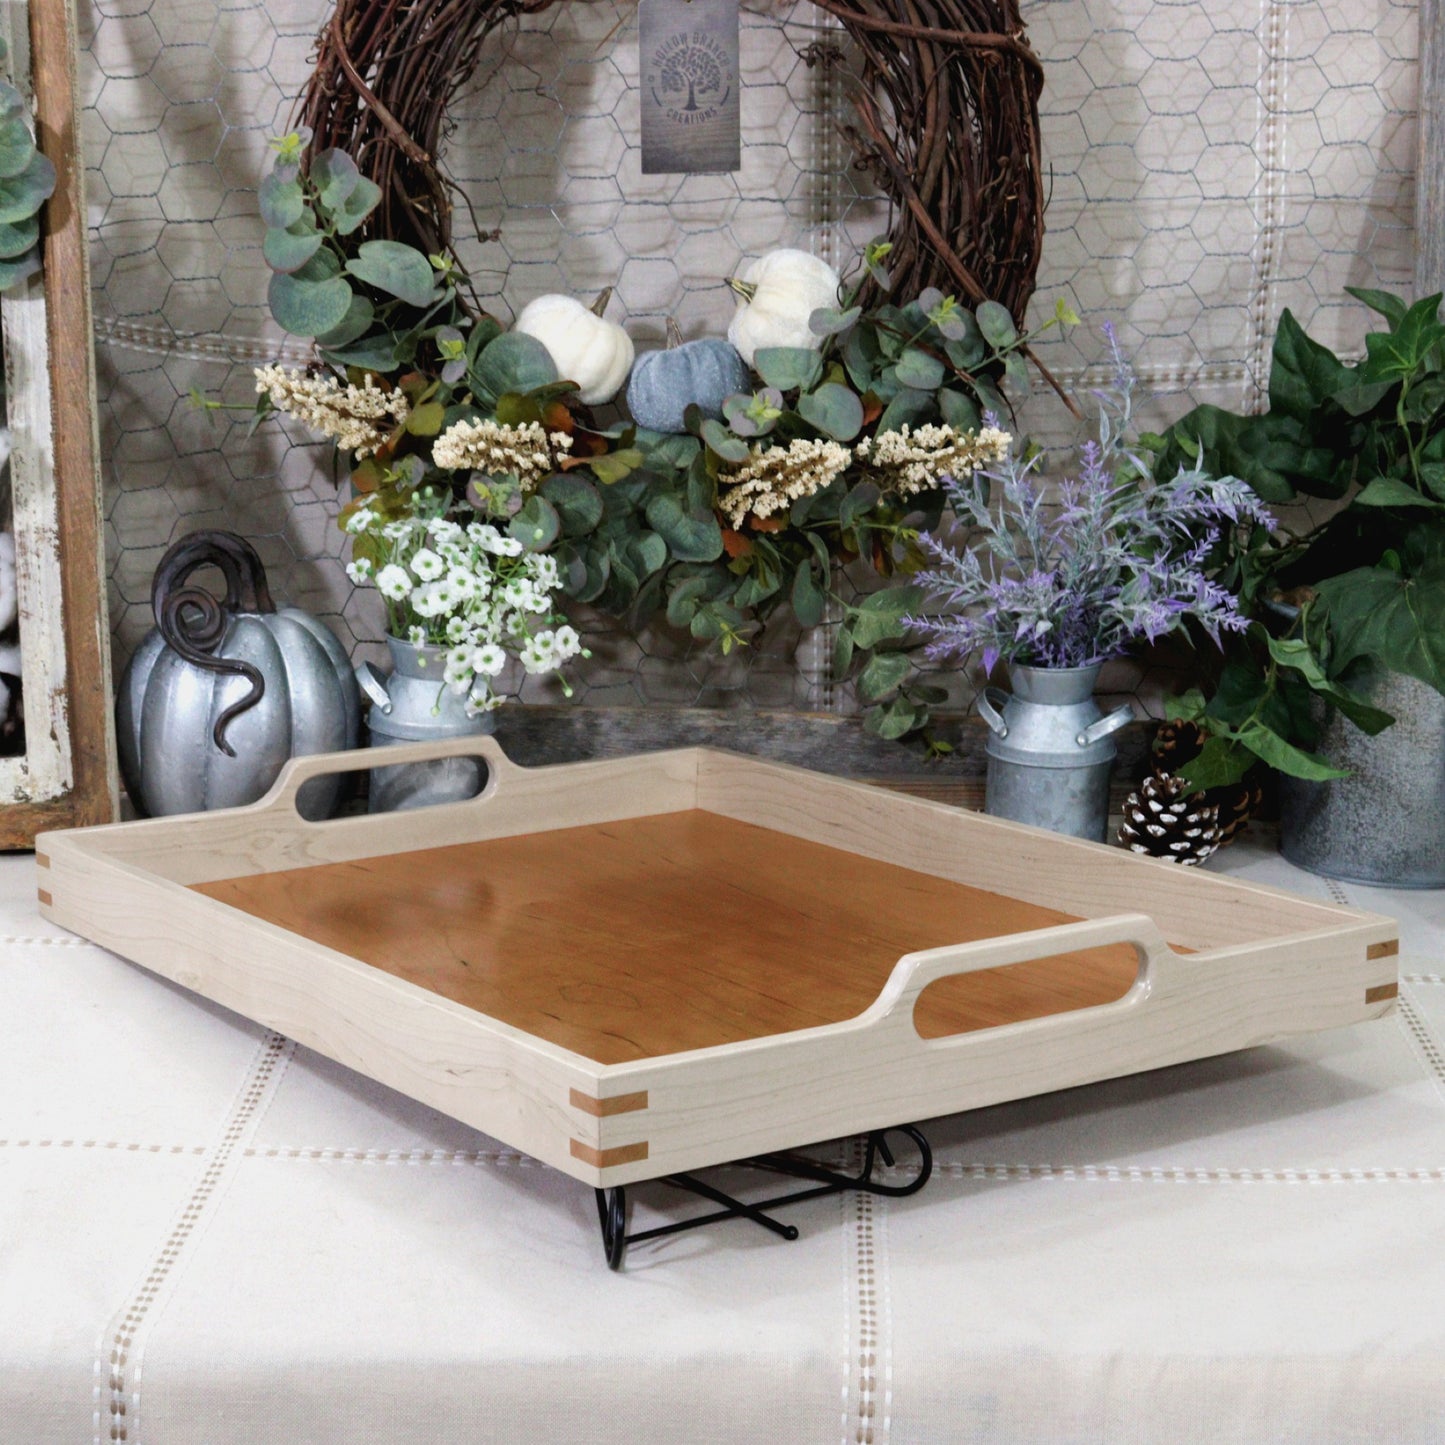 3-PC Maple Tray, Cutting Board, & Wine Carrier